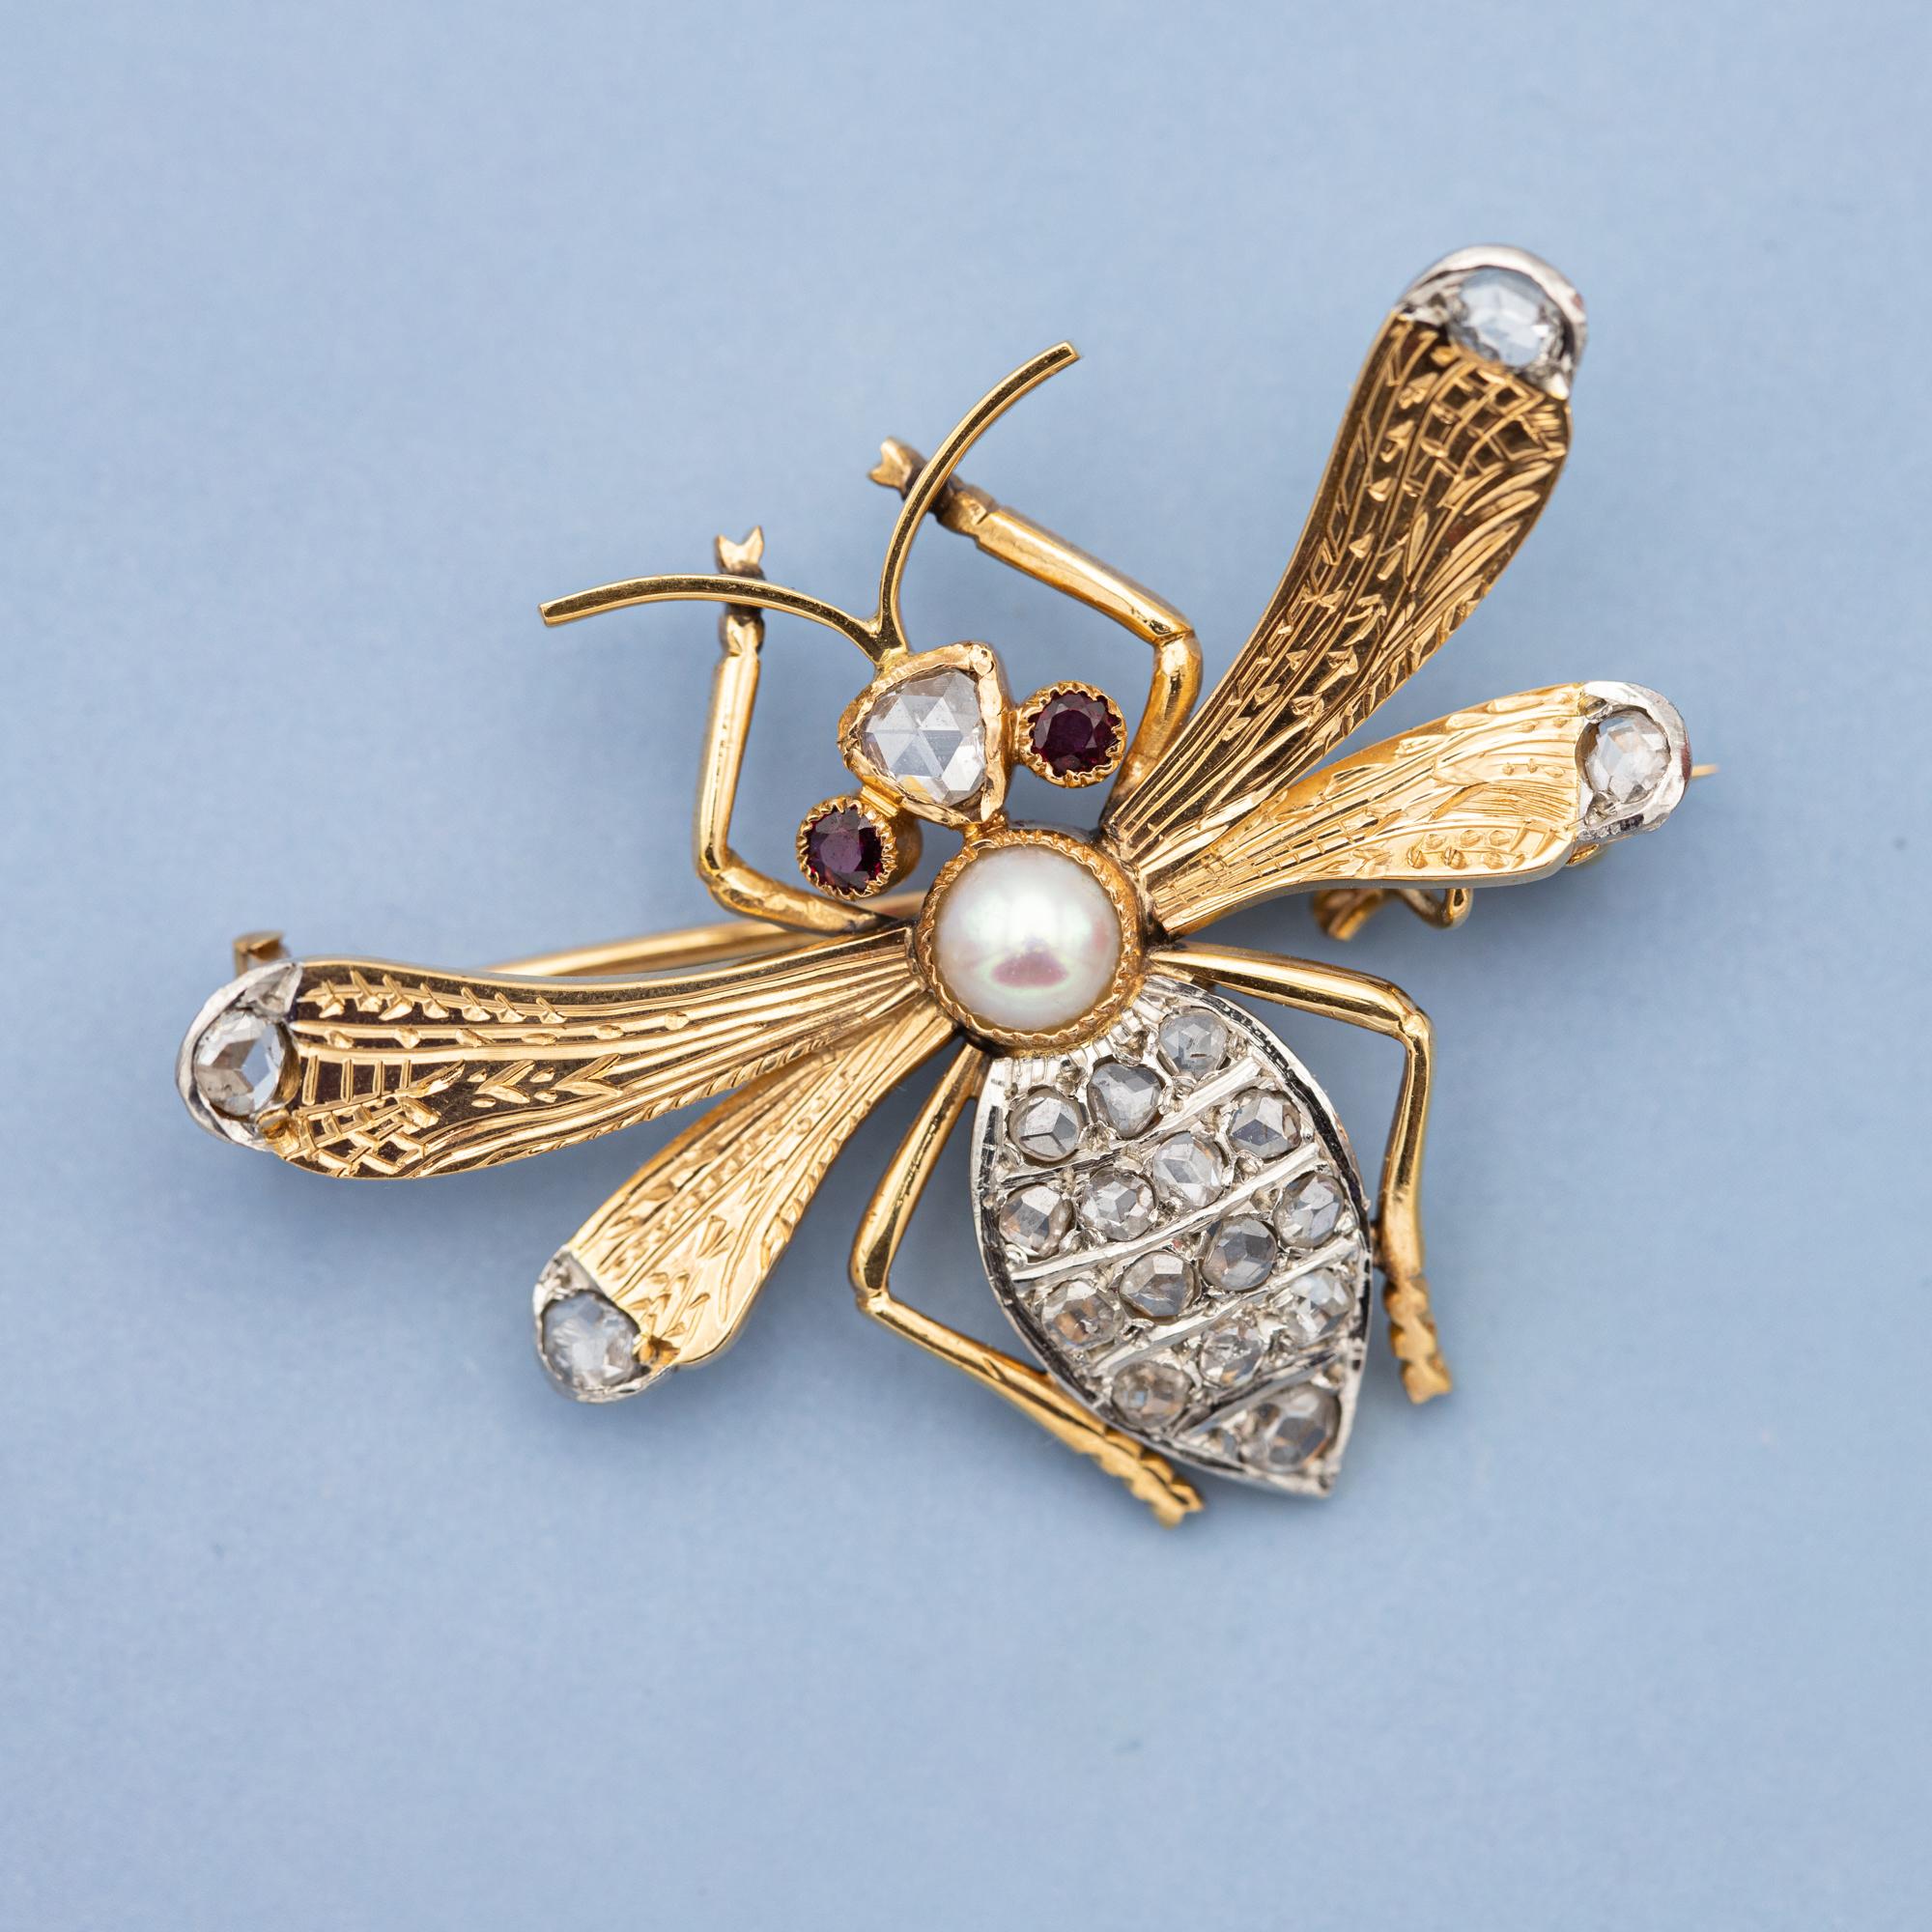 Rare Victorian brooch - 18 K Yellow gold Queen Bee set with rose cut diamond For Sale 2